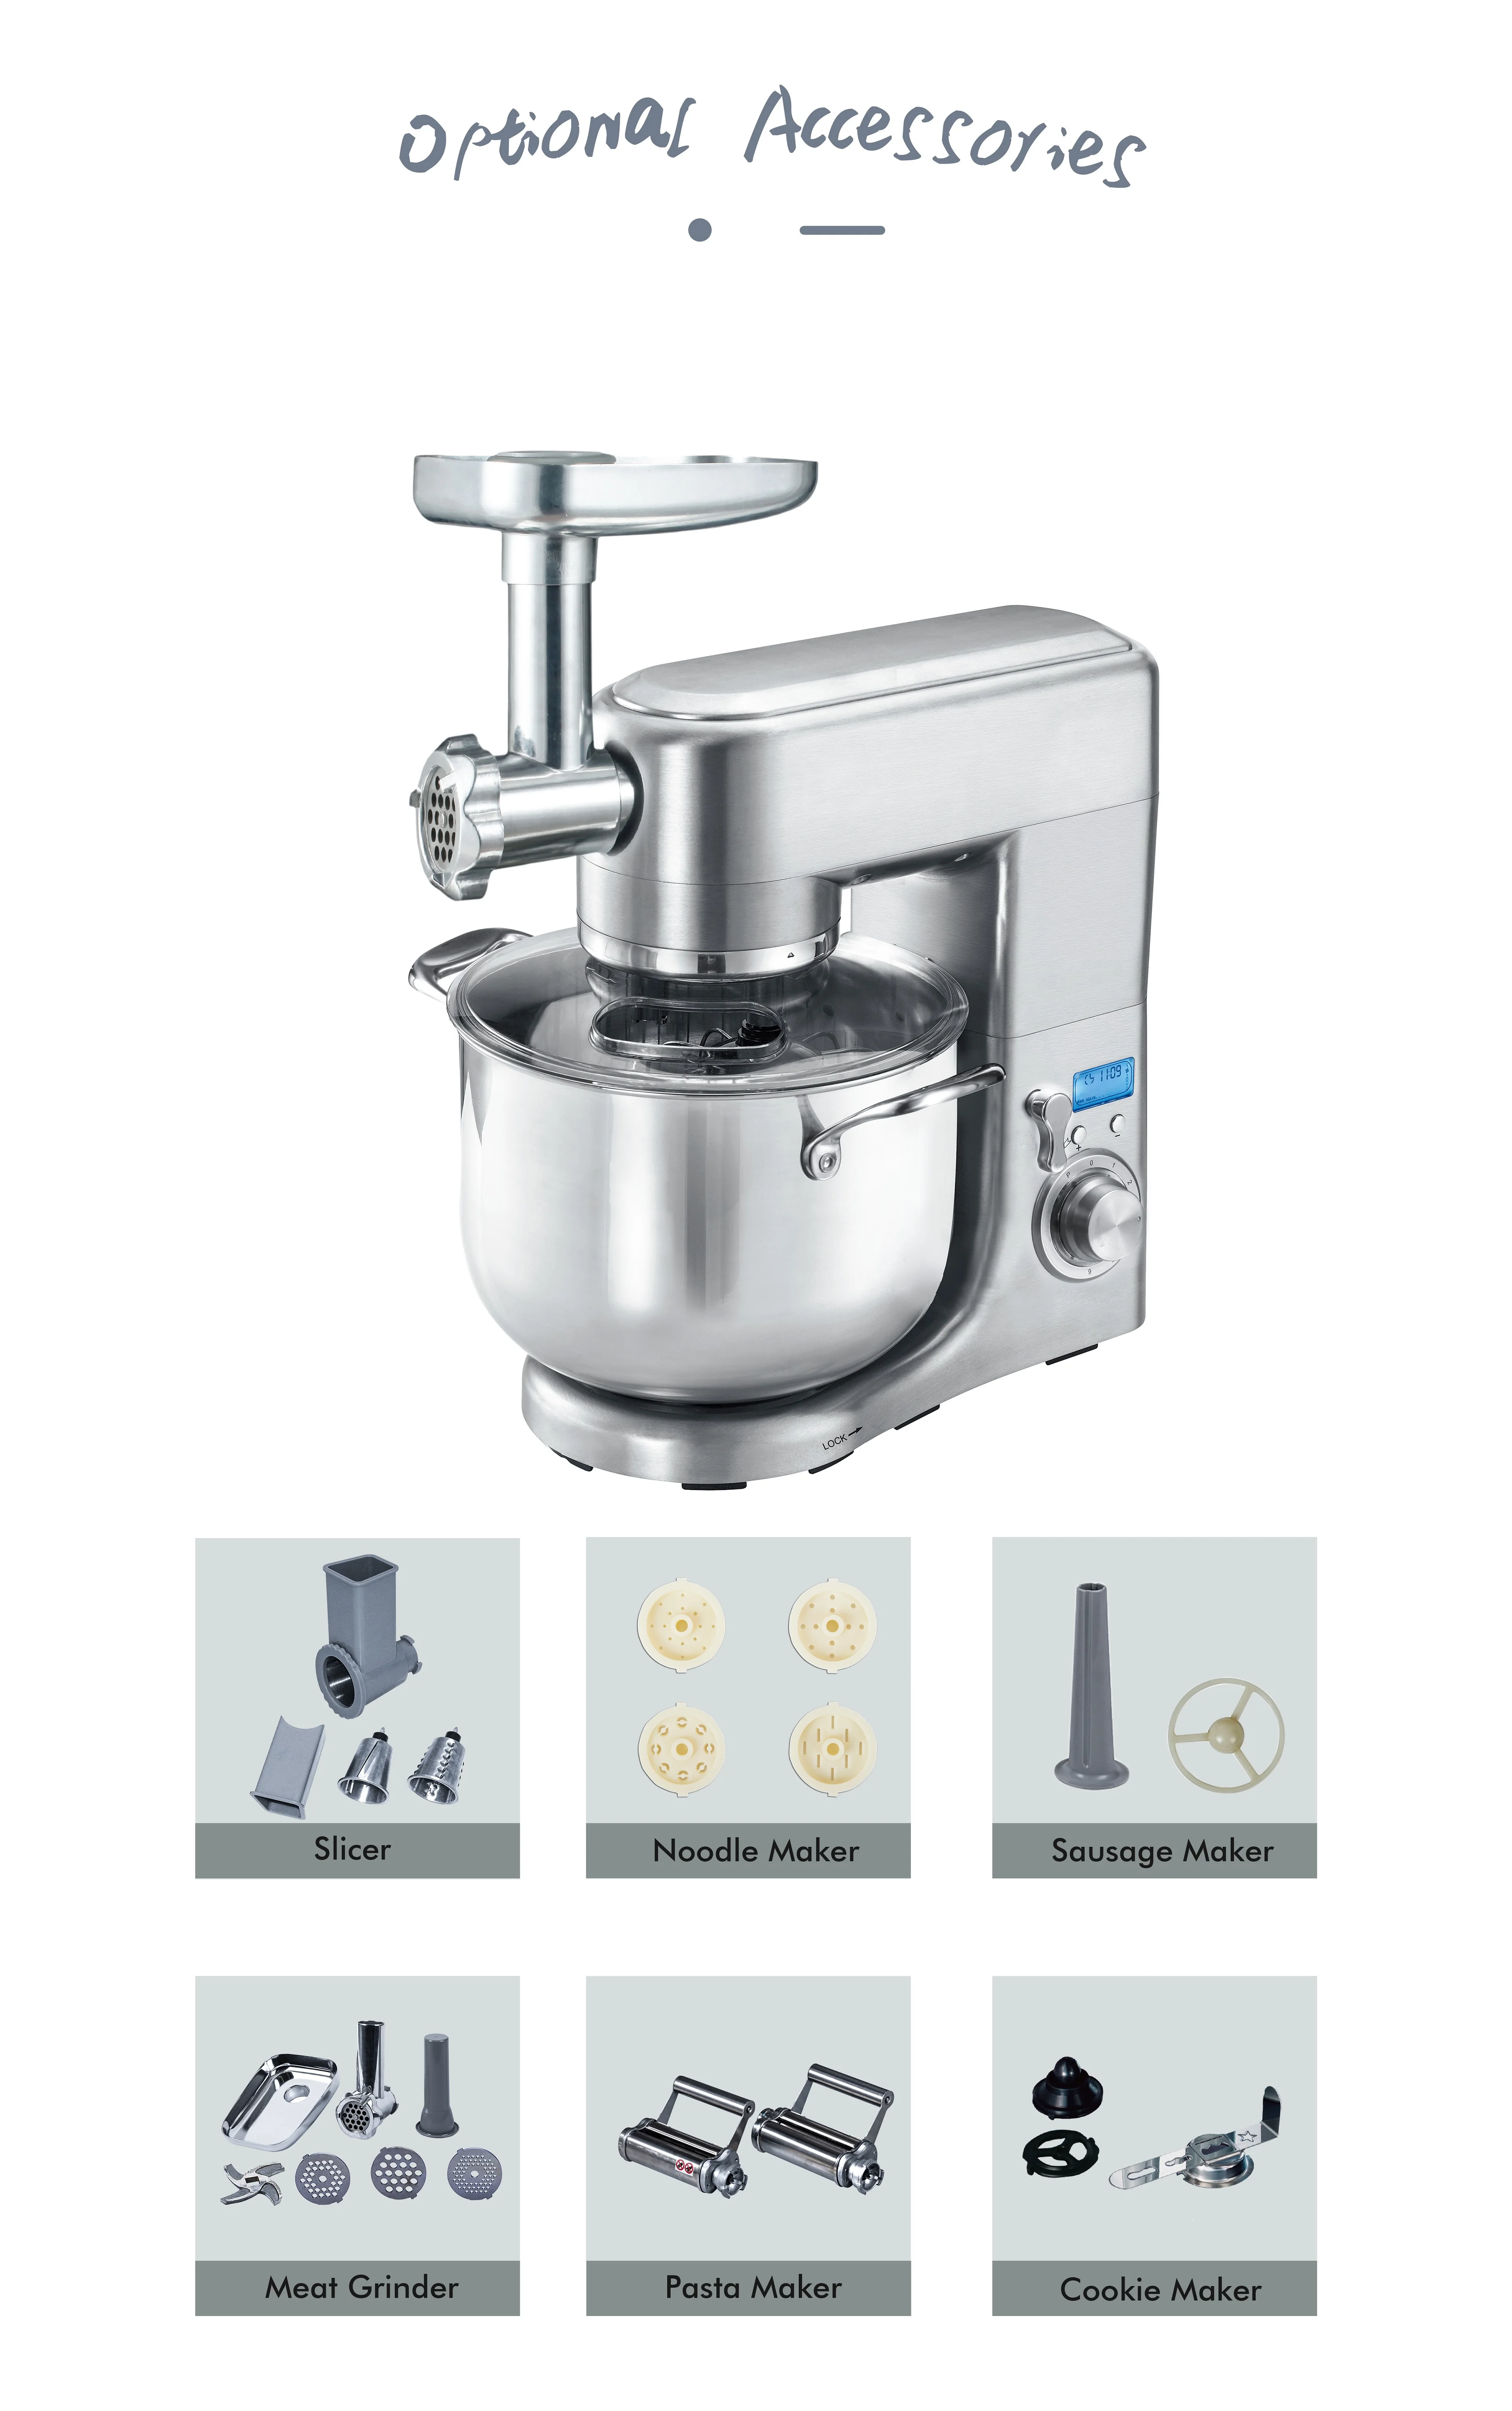 Stainless steel 10 liter ood mixer bracket automatic flour egg bread planetary mixer